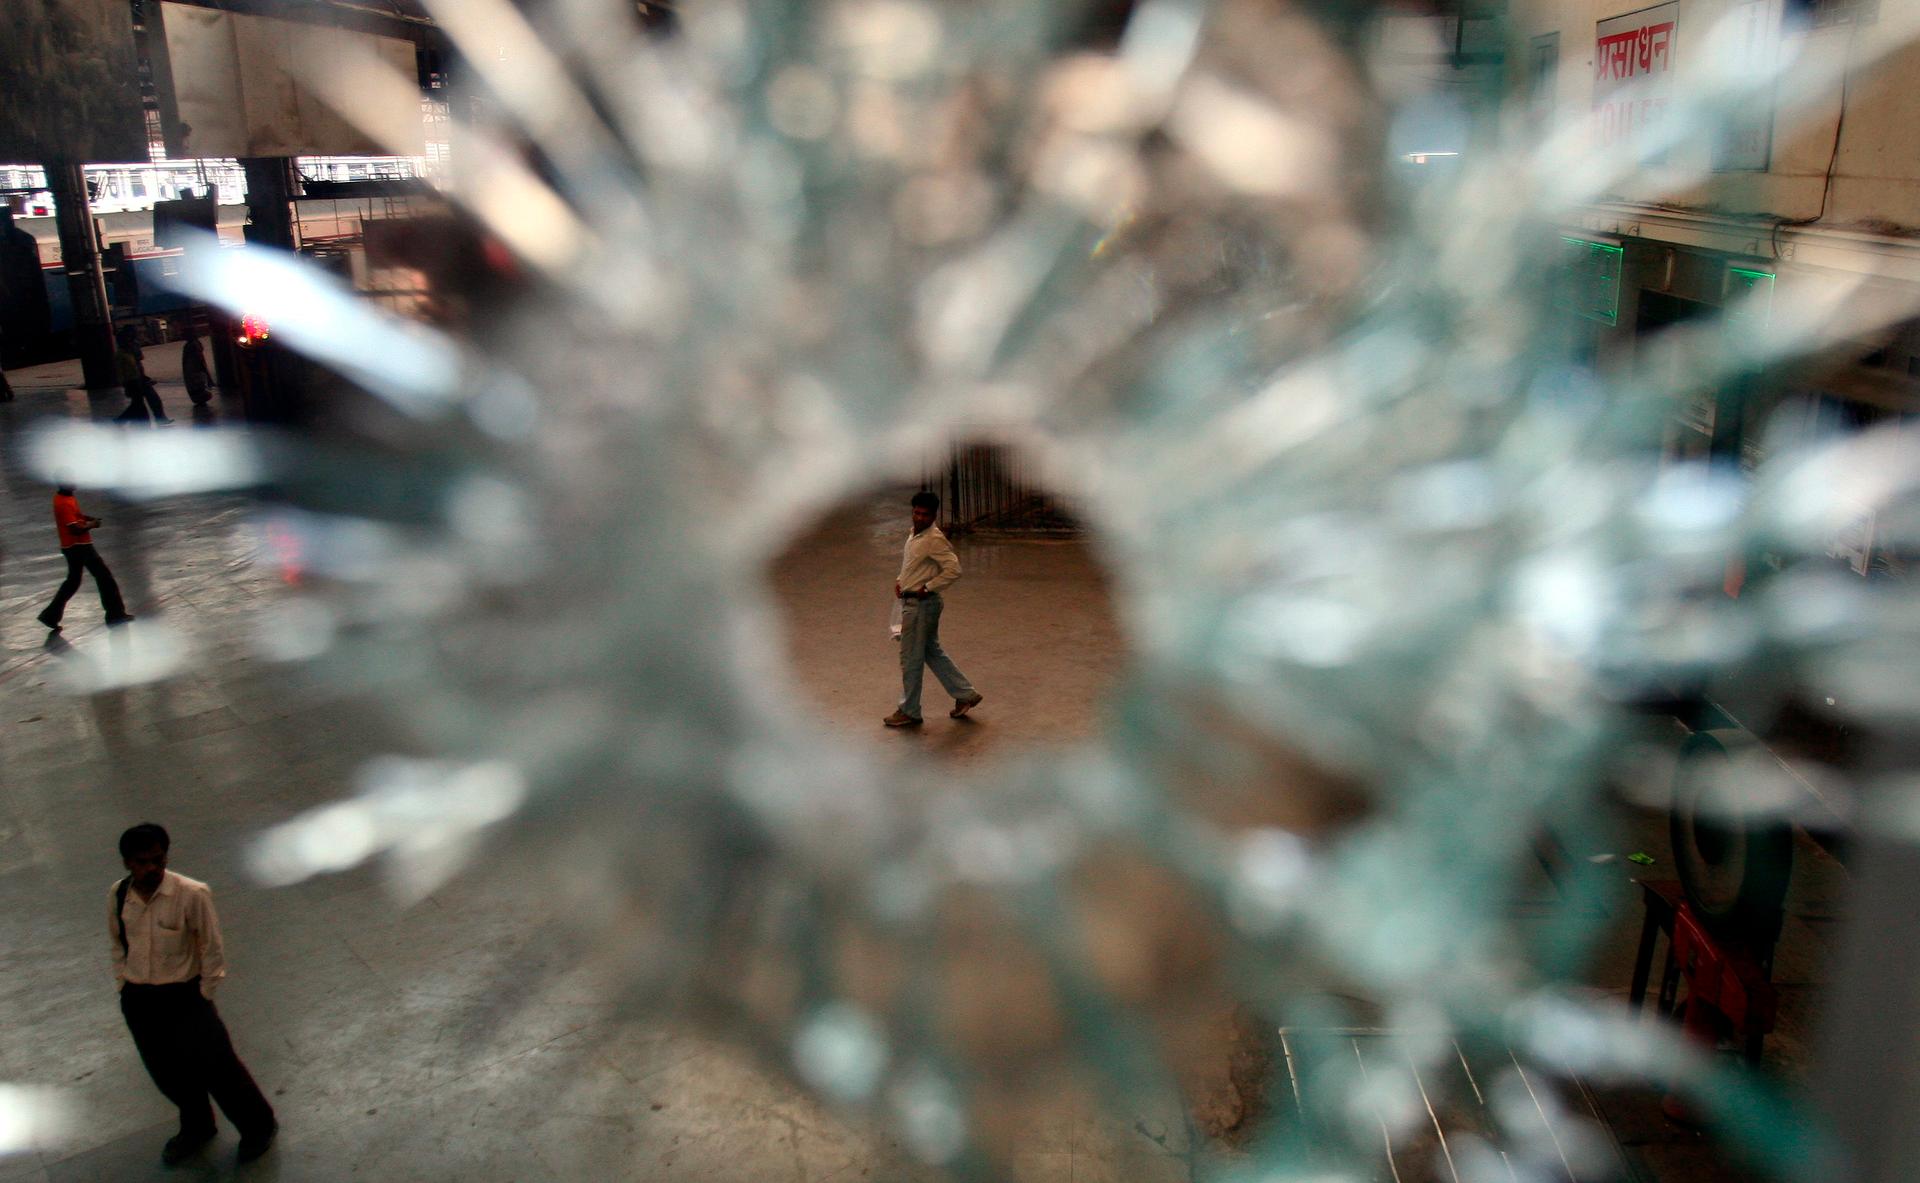 Restaurant window damaged in 2008's militant attack is seen at the railway station in Mumbai.